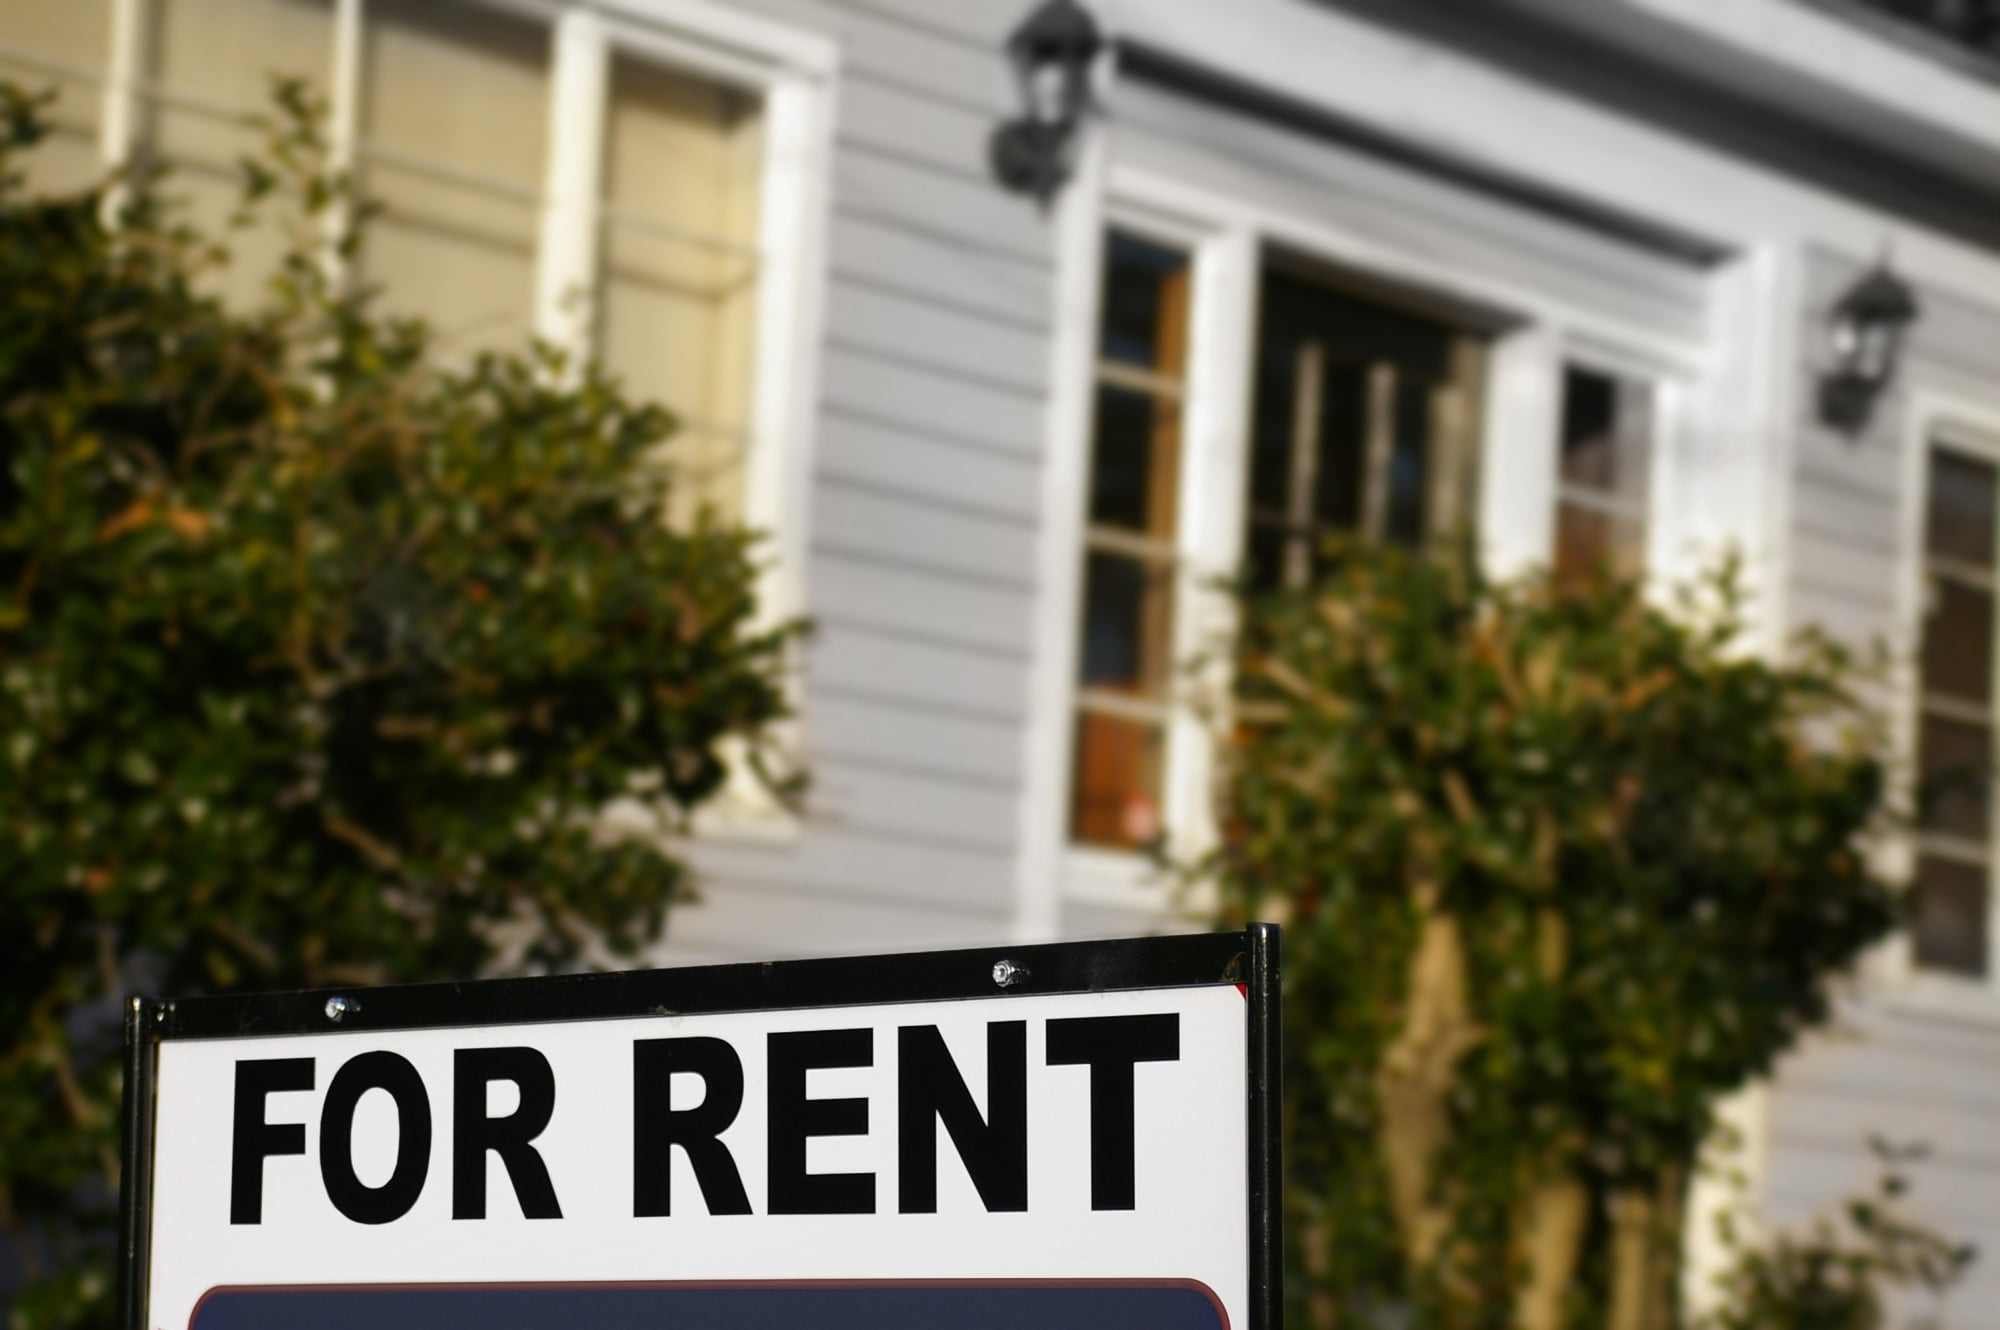 If you're in the market for a rental, make sure you know a few key things first. Here are 3 pro tips renting an apartment.